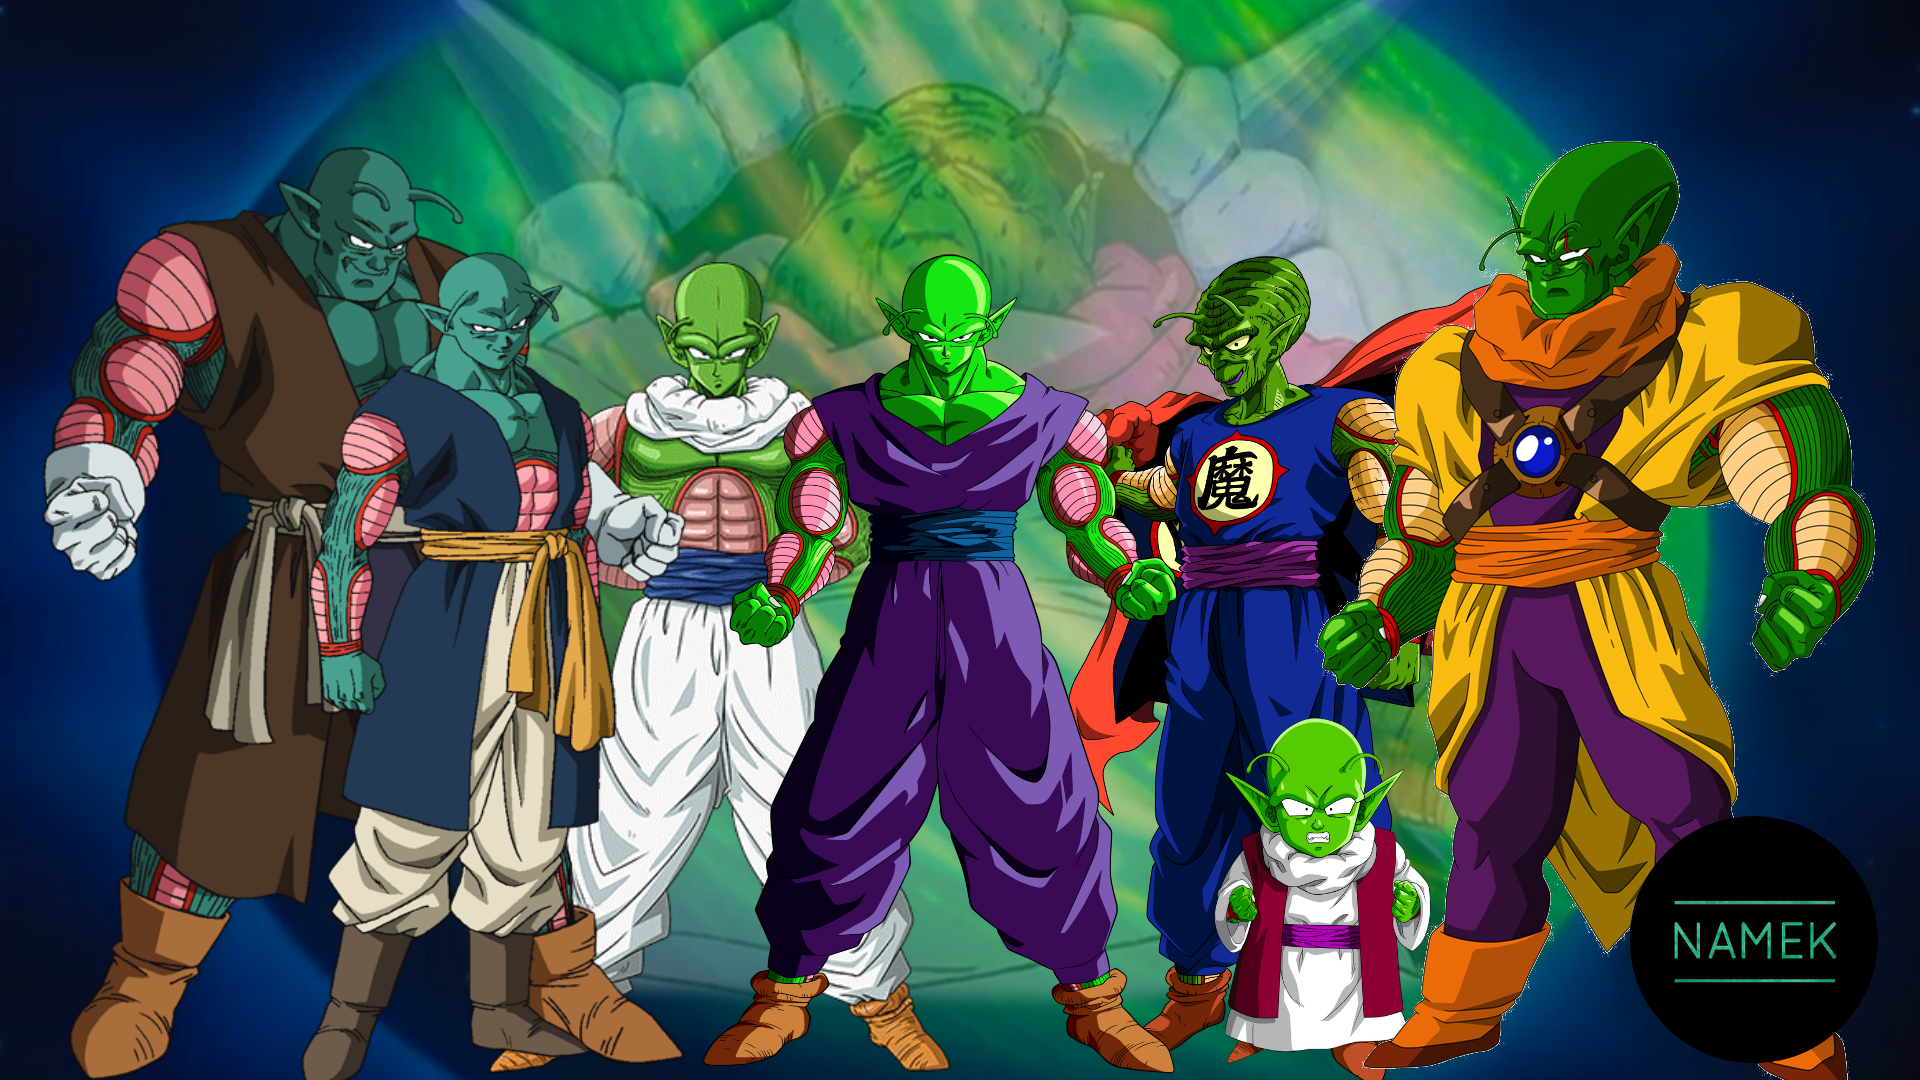 Namekians with Piccolo in the center